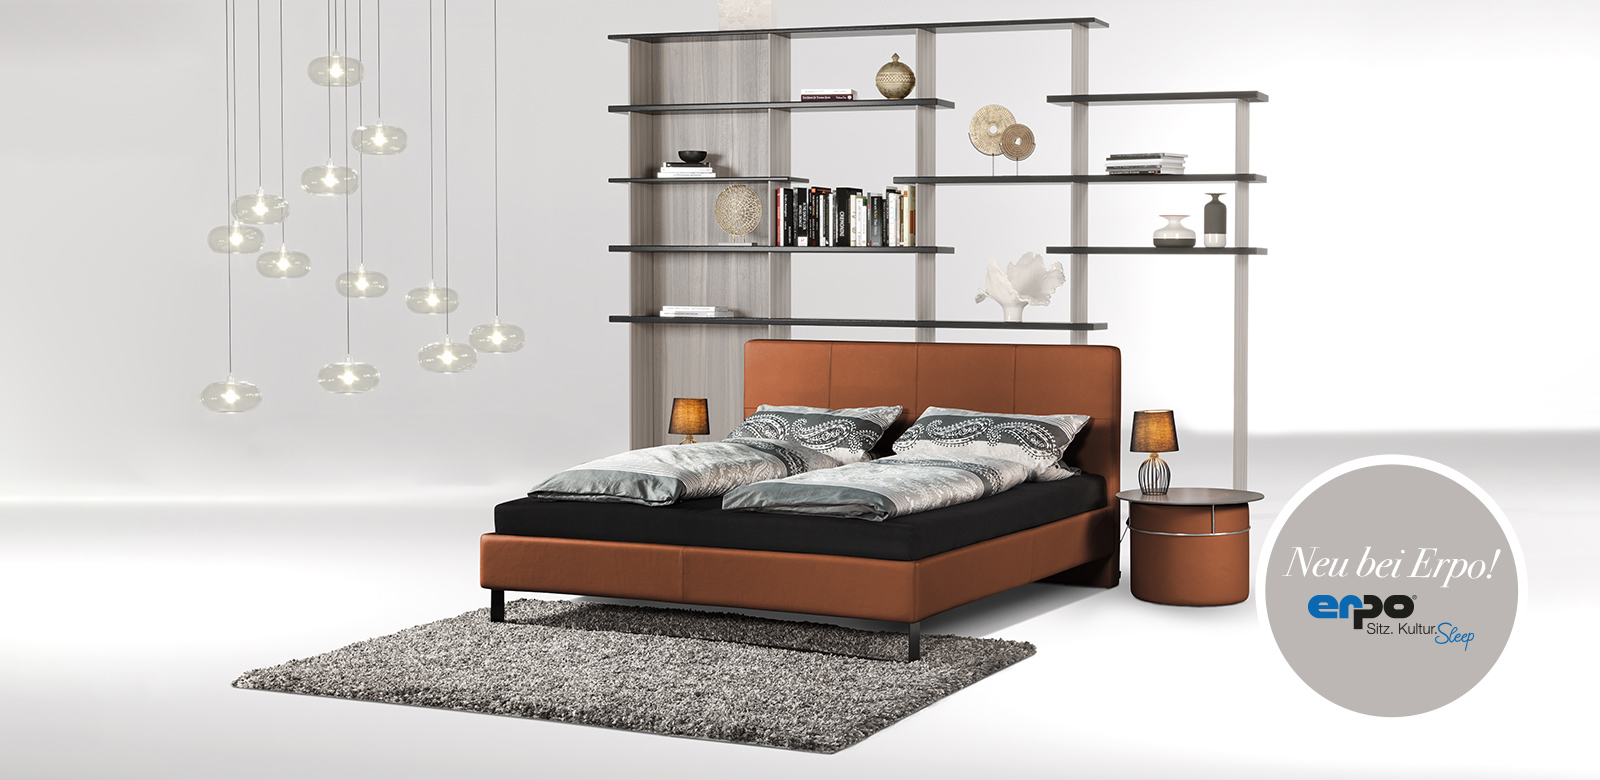 SL100 luxury bed with brown leather